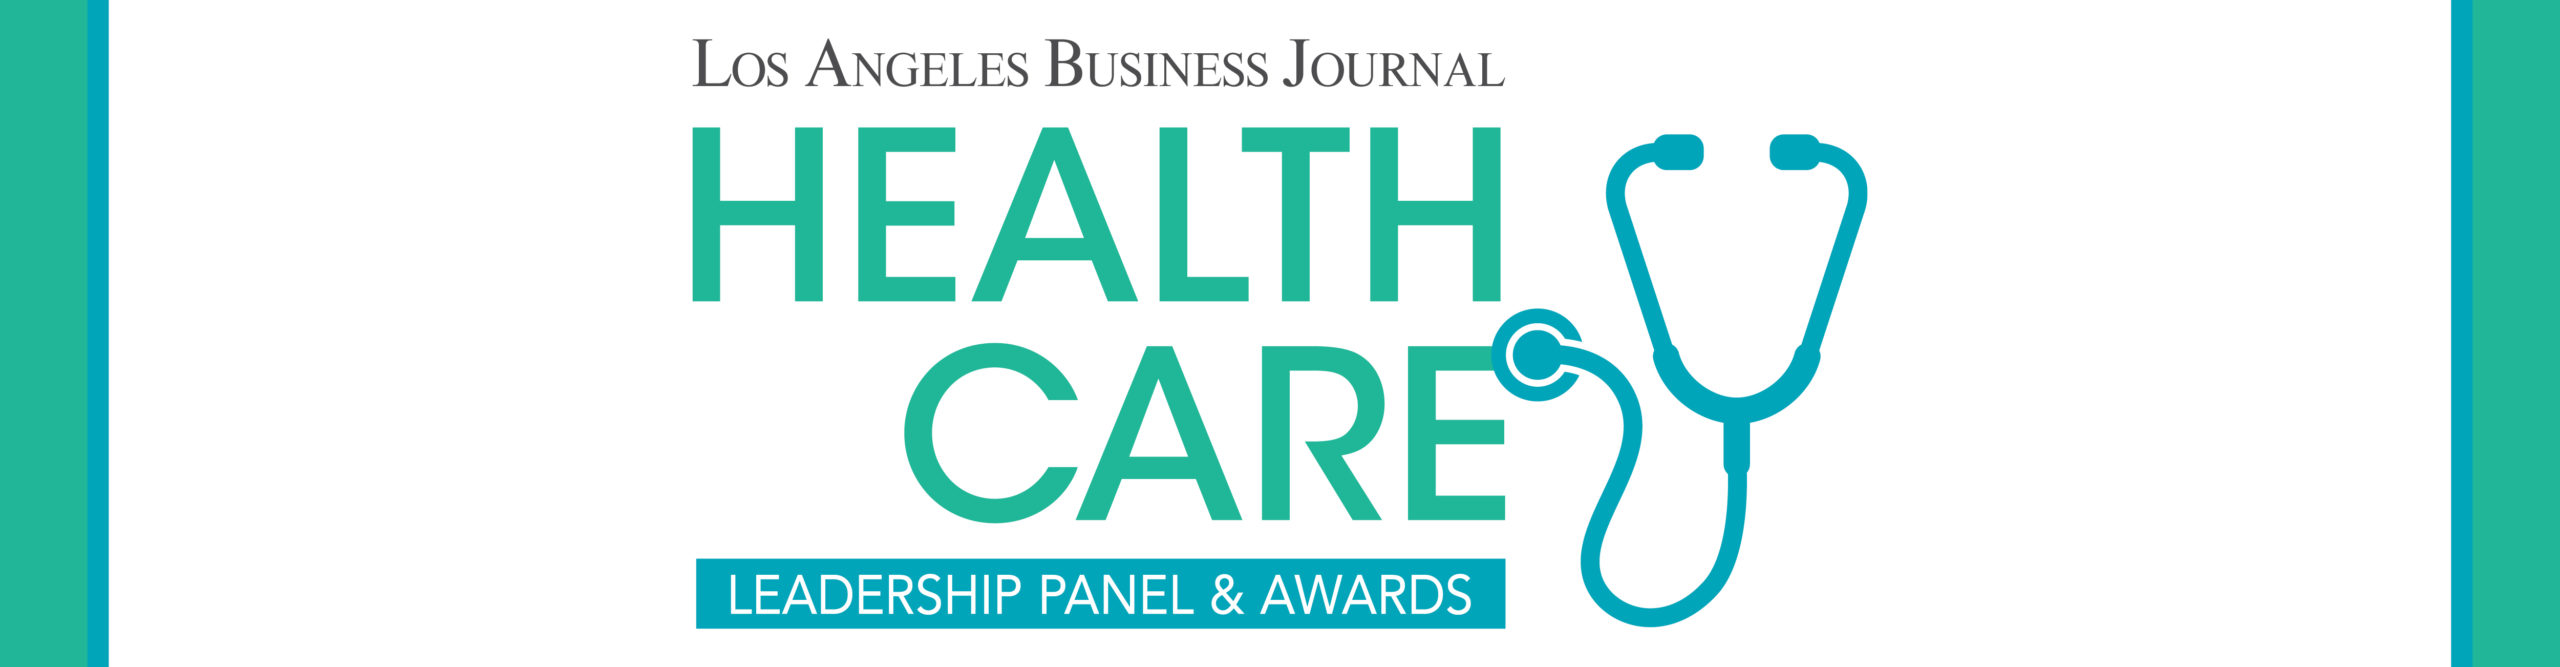 Los Angeles Business Journal Health Care Leadership Panel & Awards Event Banner